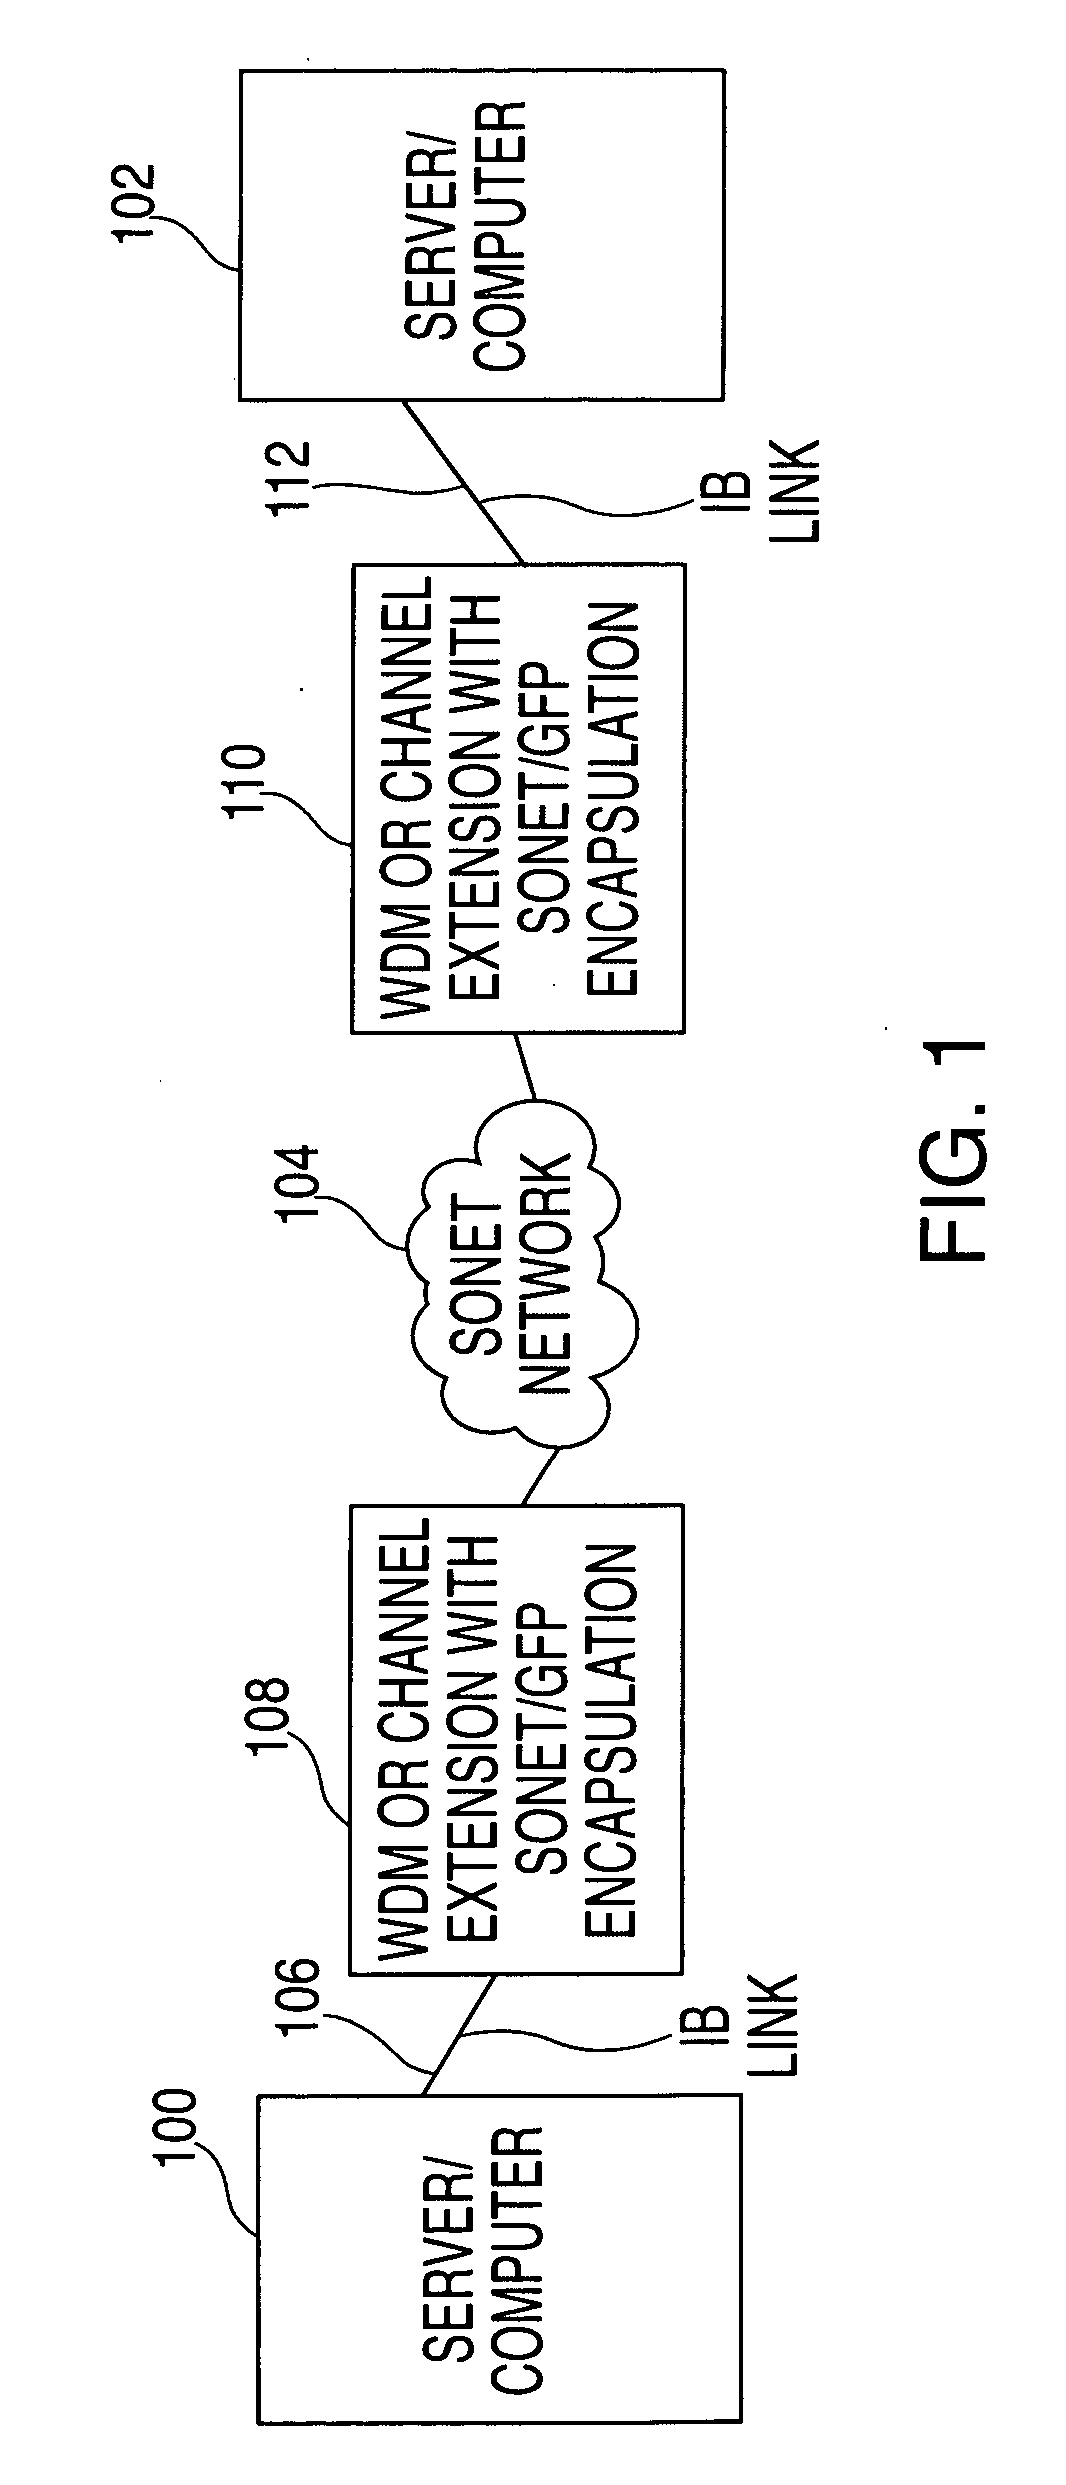 Methods, systems, and storage media for data encapsulation in networks